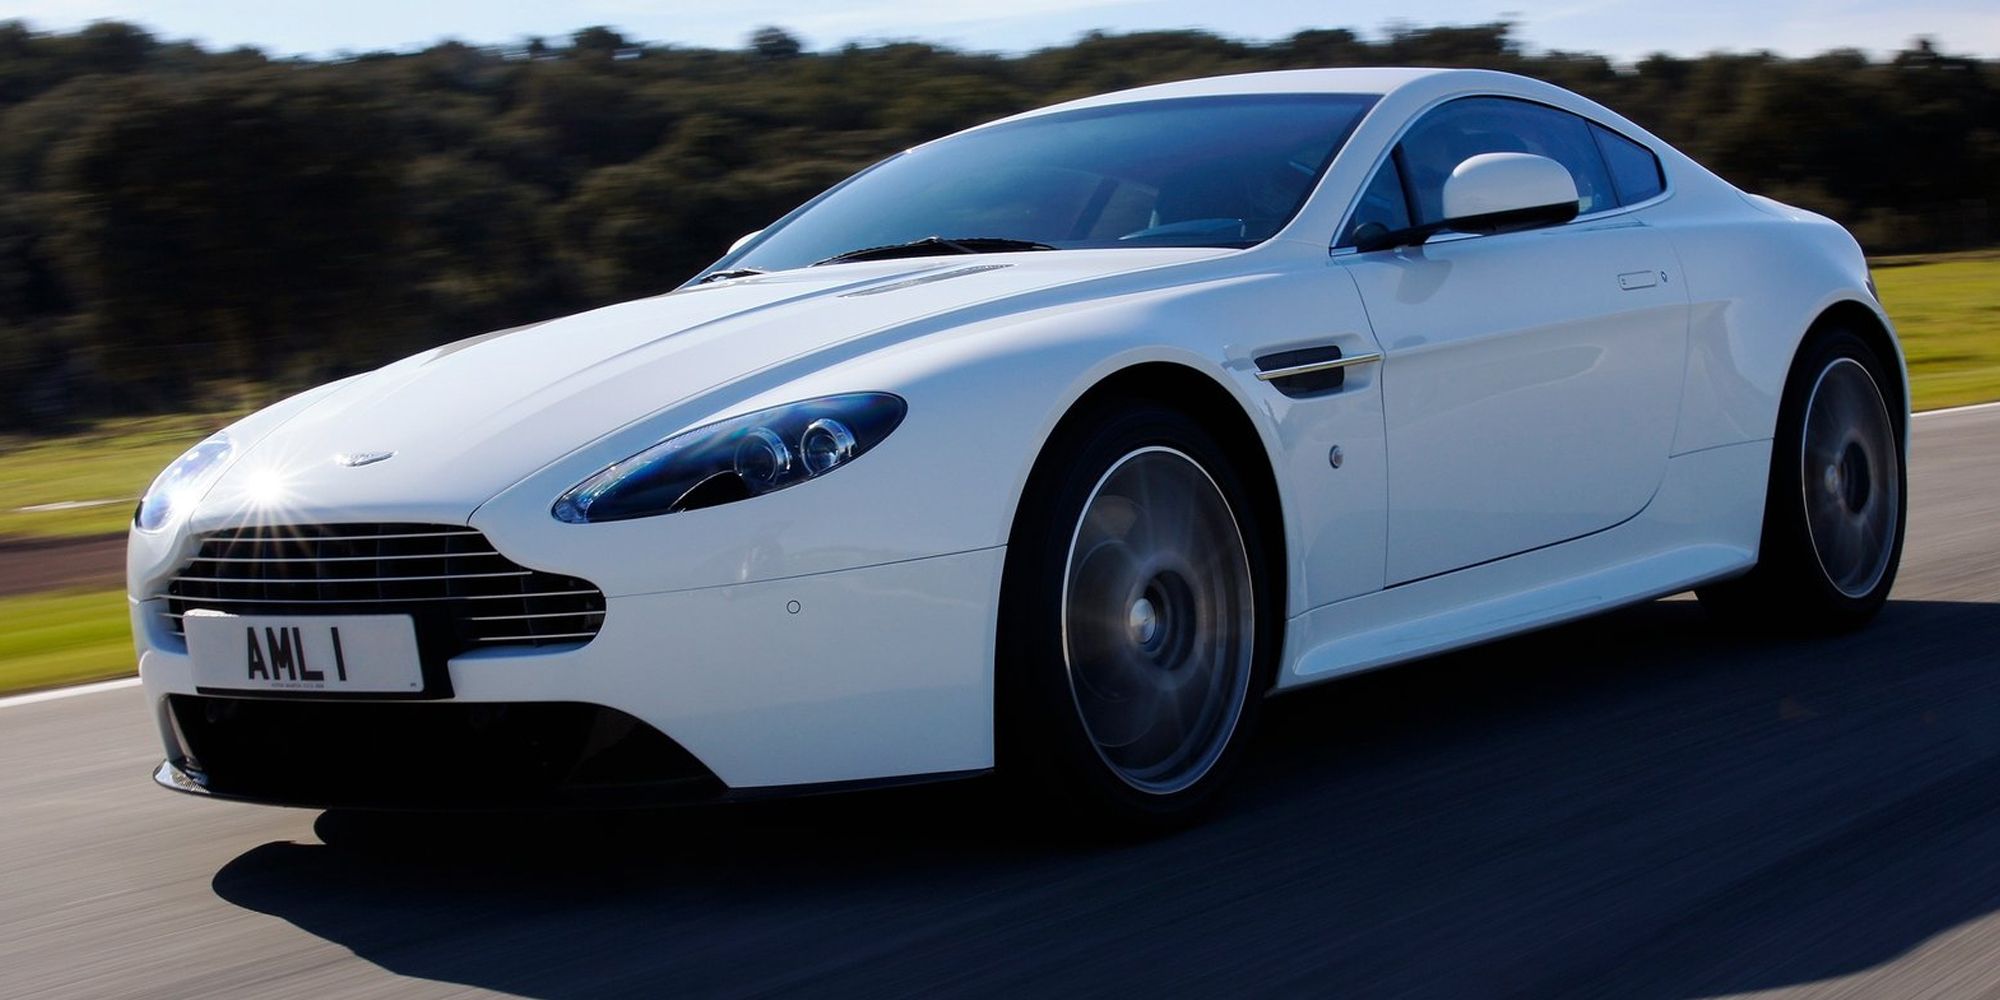 Front 3/4 view of a white V8 Vantage S on the move